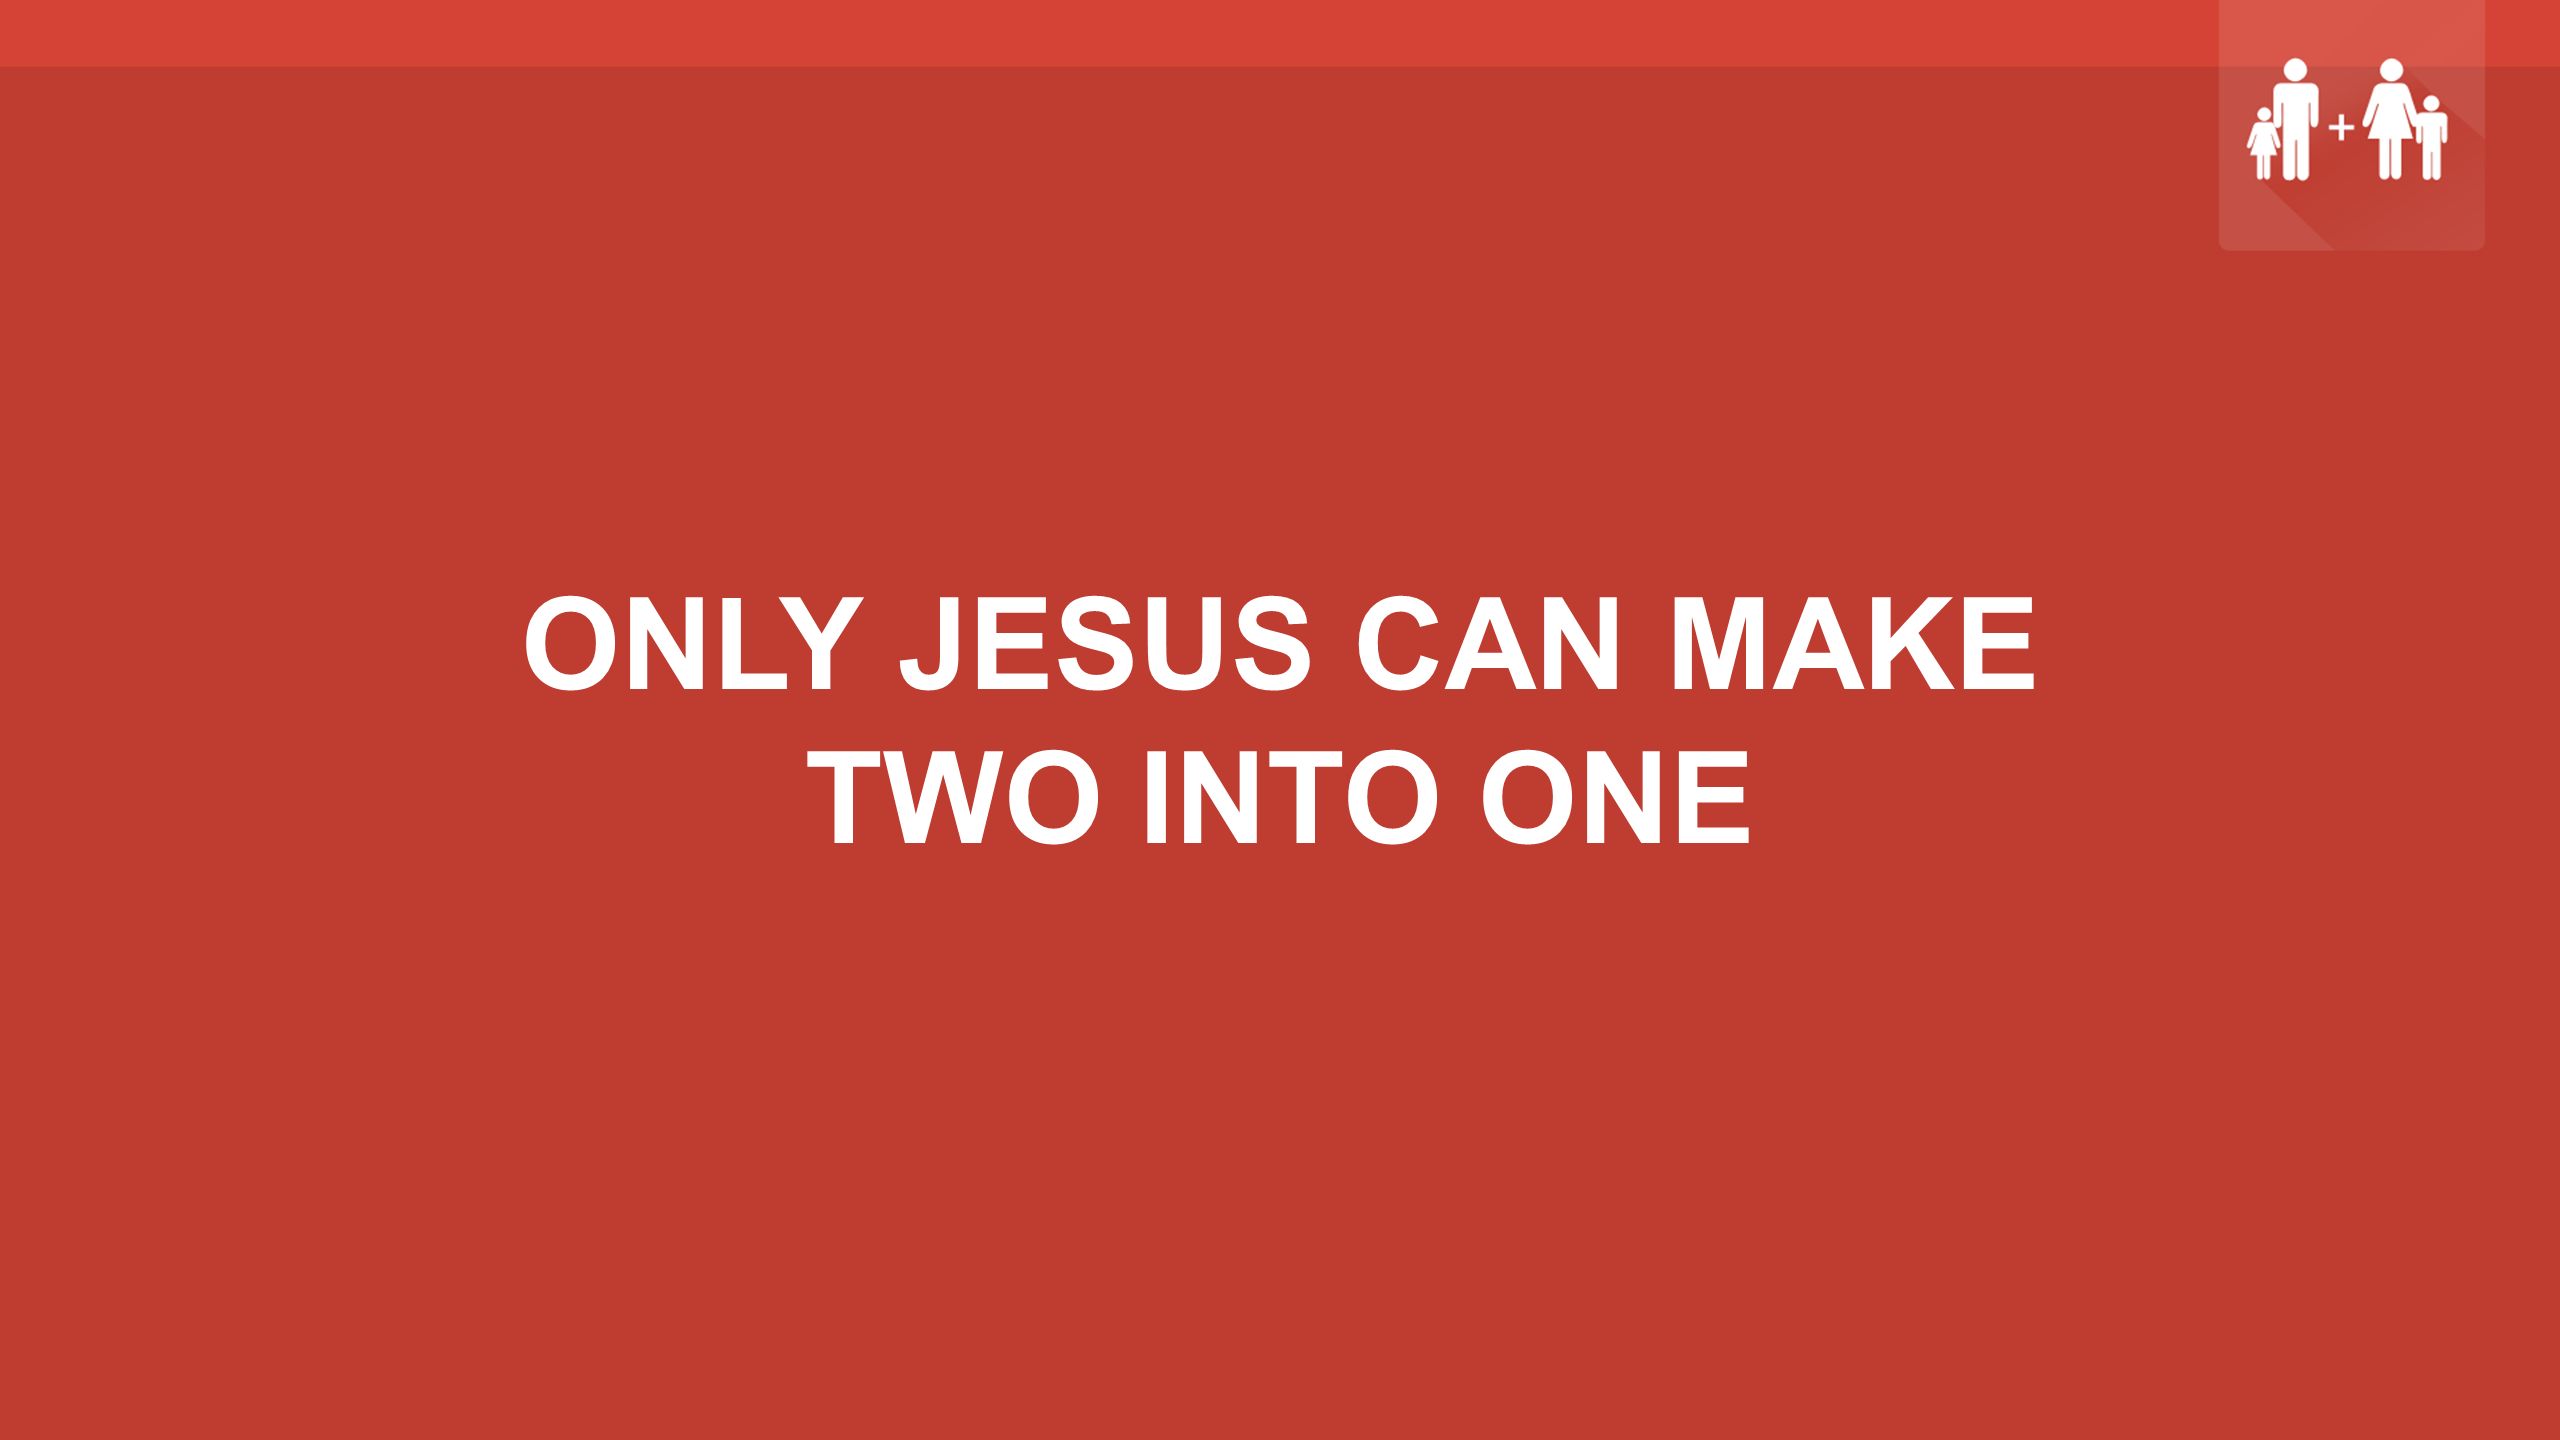 ONLY JESUS CAN MAKE TWO INTO ONE